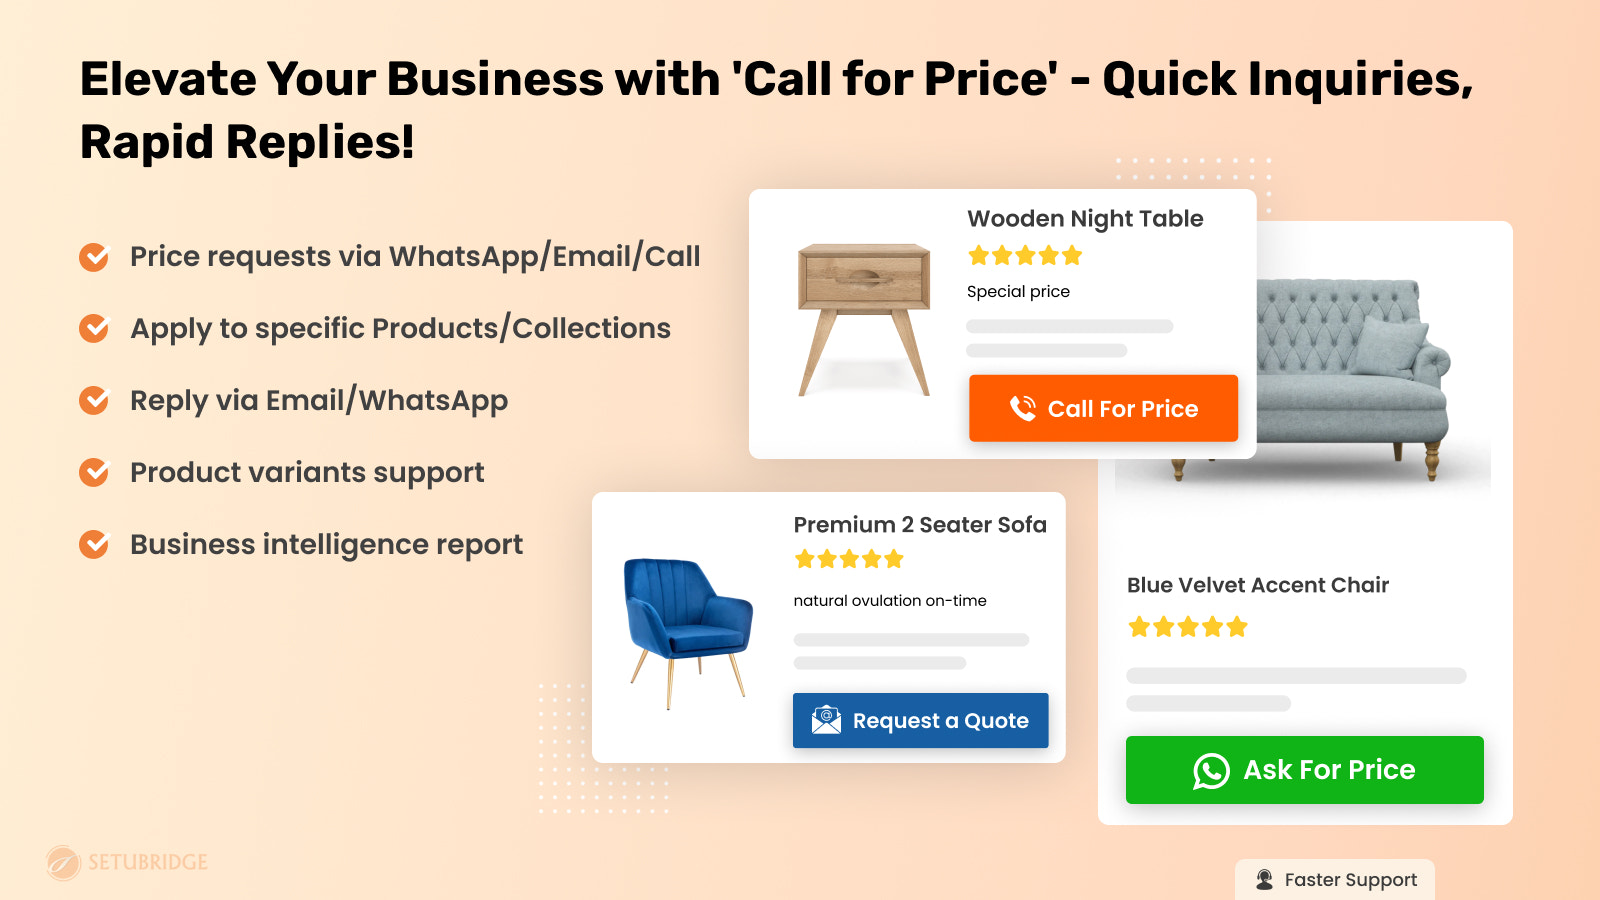 Application Shopify SB: Call For Price, Hide Price